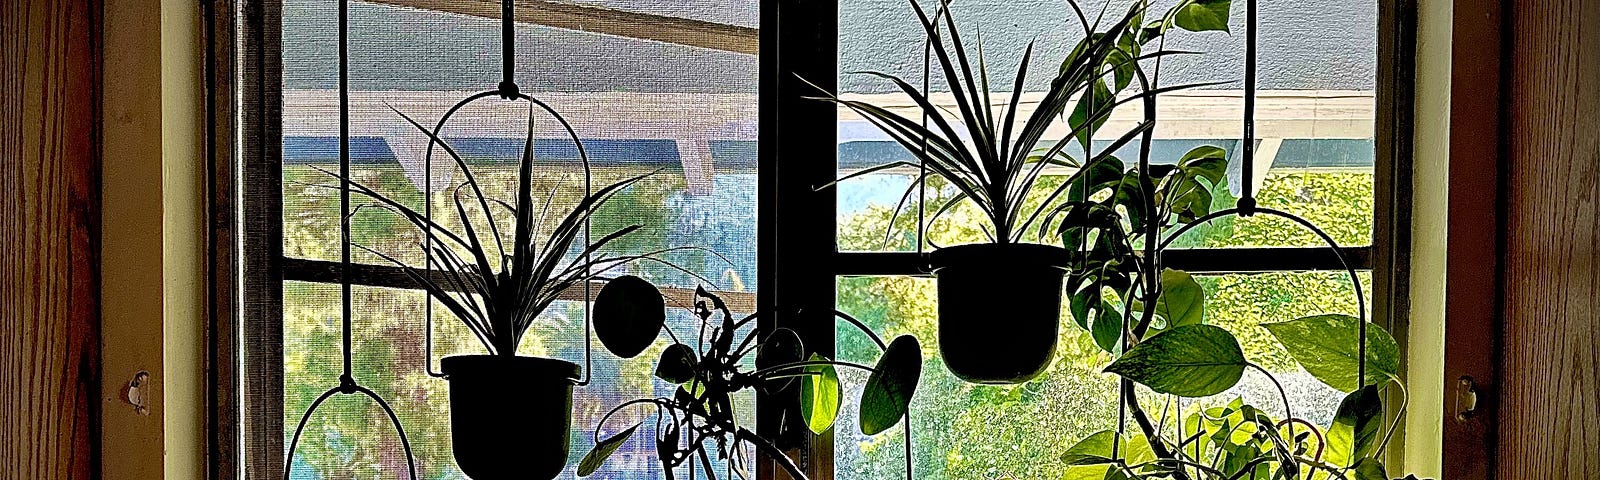 Window with hanging plants in it.